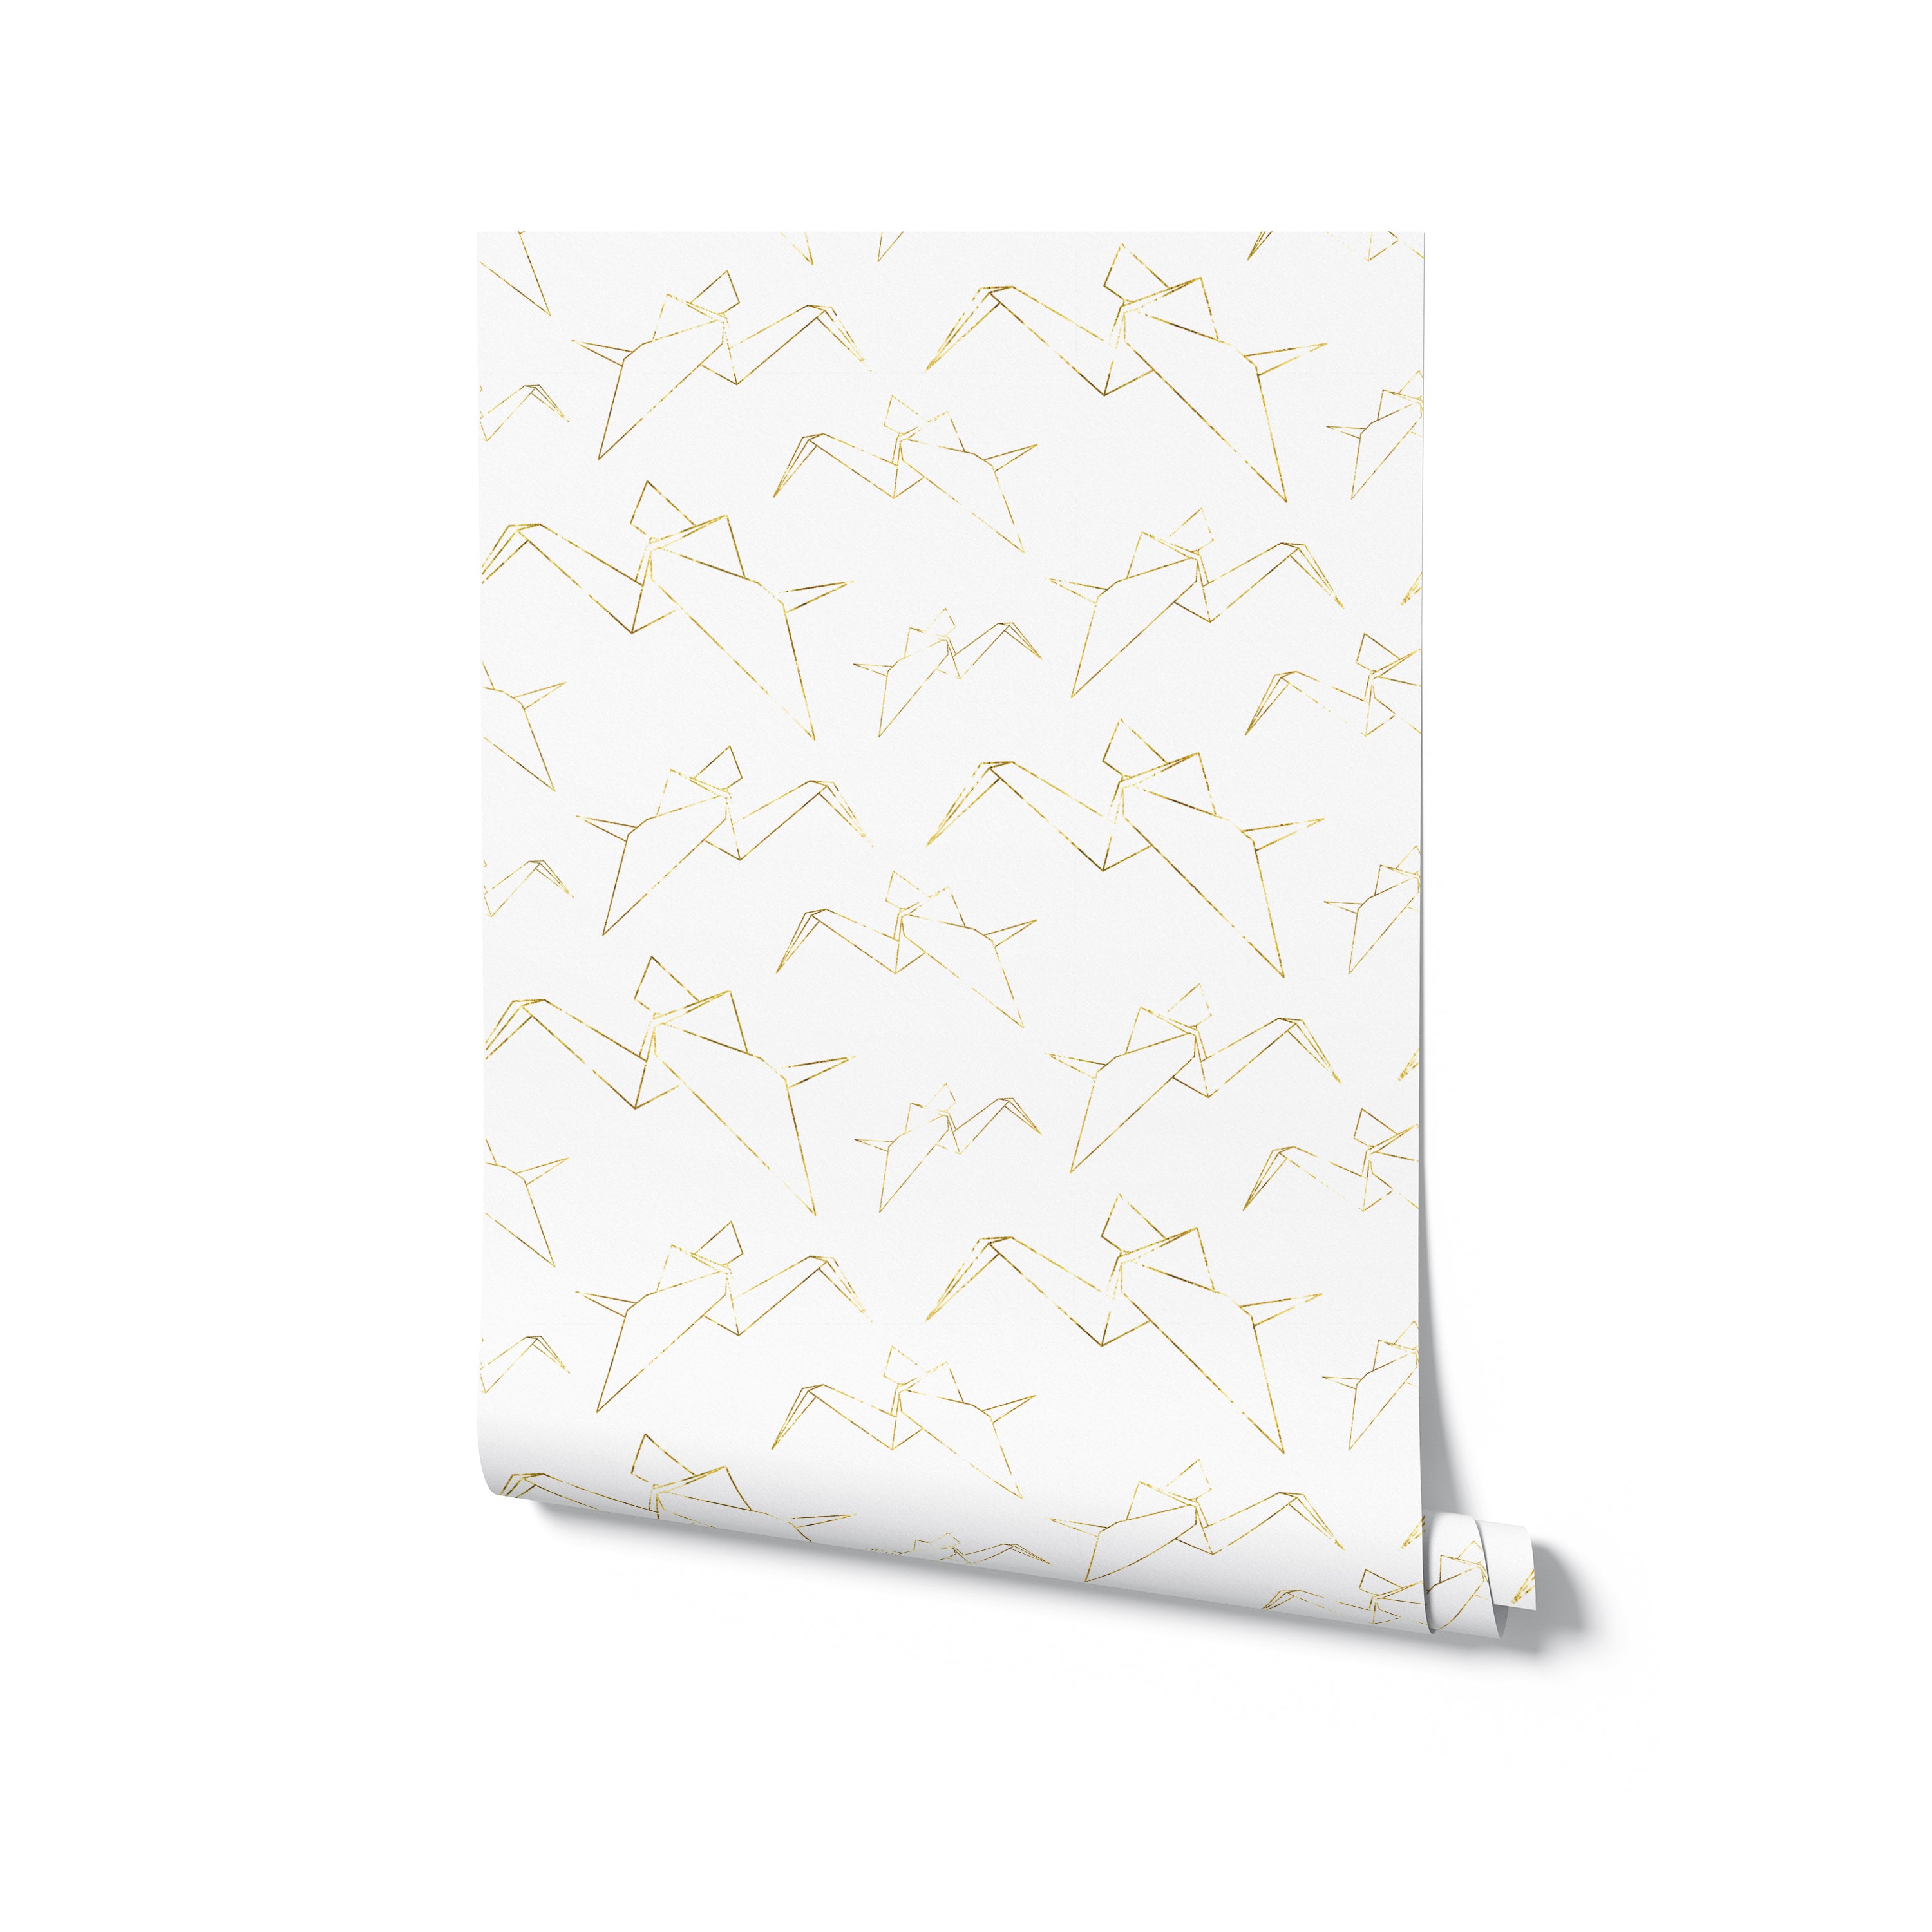 A roll of white wallpaper showcasing a repeating pattern of gold origami cranes. The cranes are outlined in gold, creating a stylish and sophisticated look suitable for modern interiors.